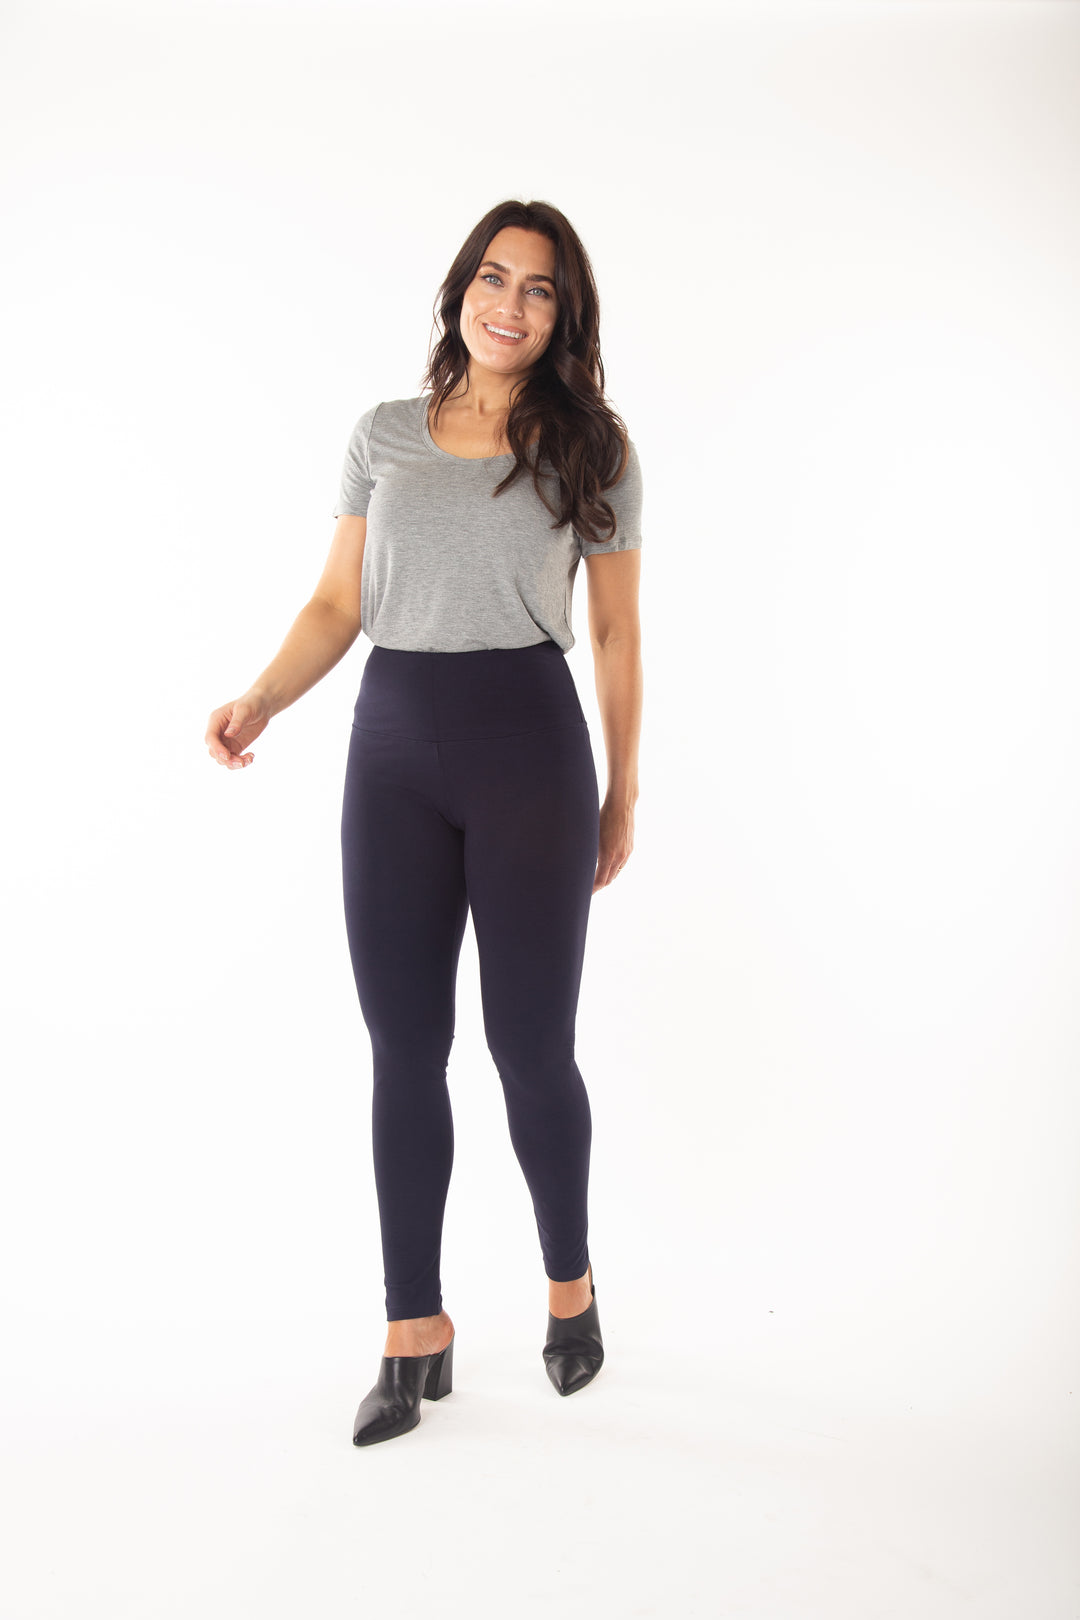 Clothing Love – Intro Pull-On Fit Leggings Intro the Slimming